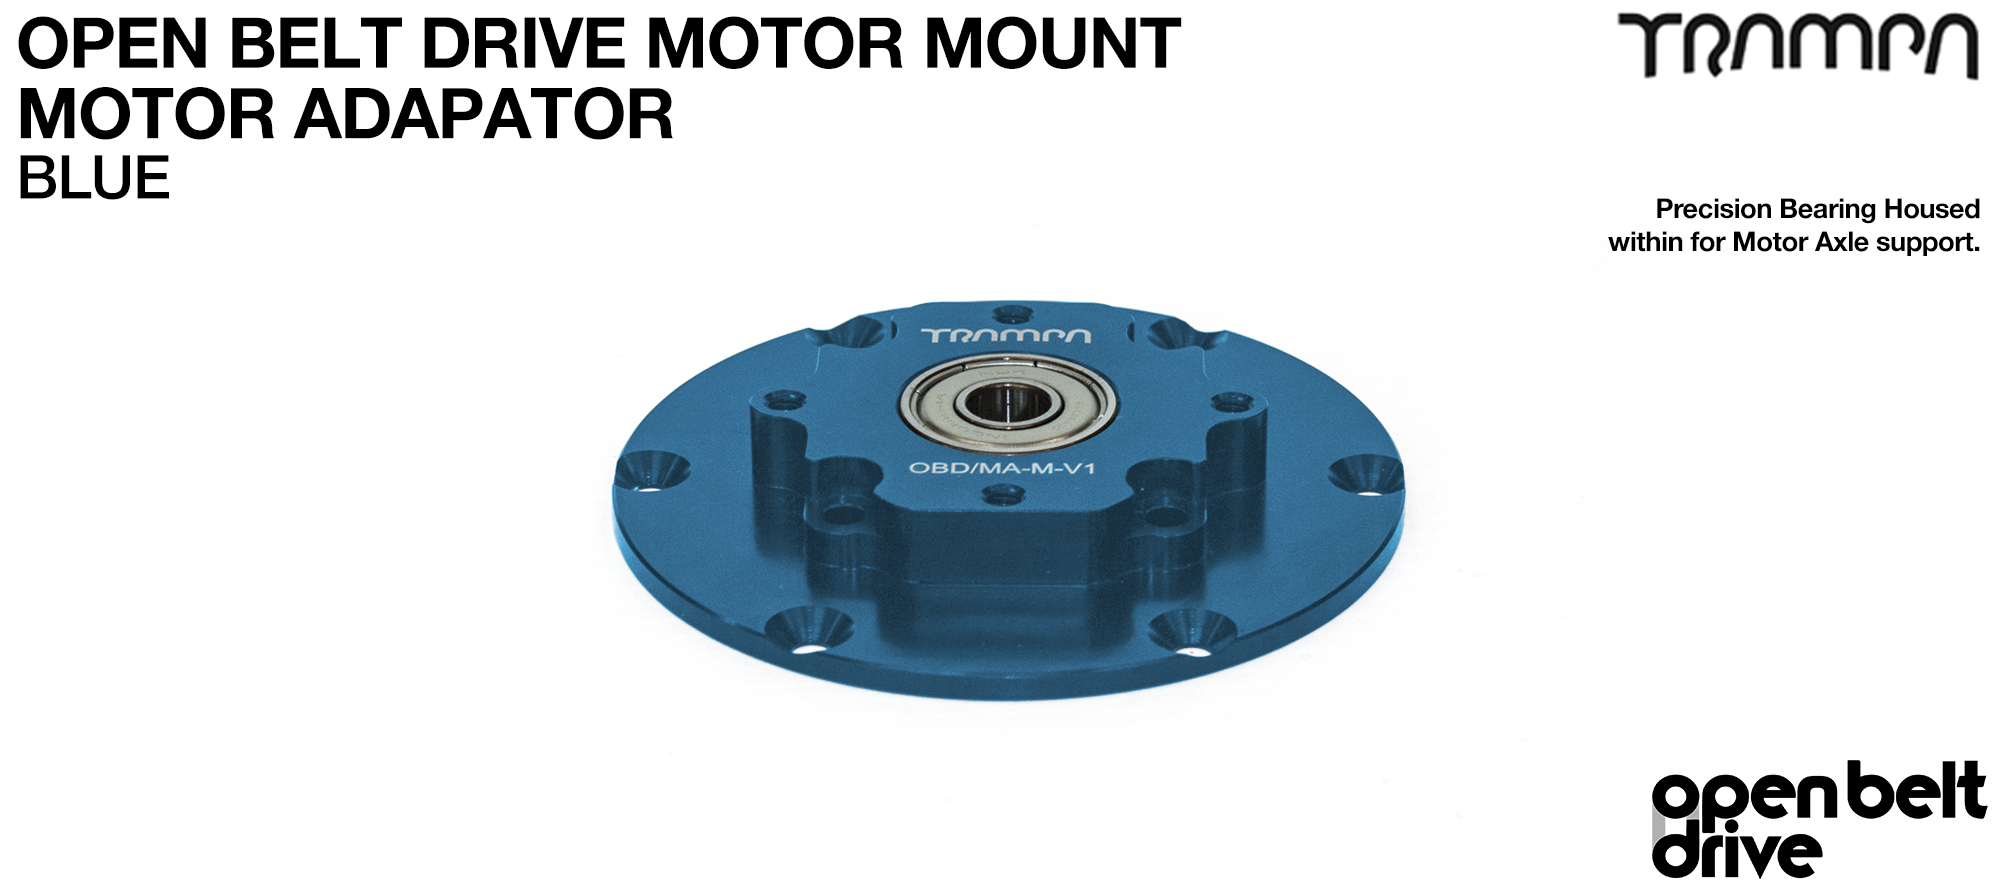 OBD Motor Adaptor with Housed Bearing - BLUE 